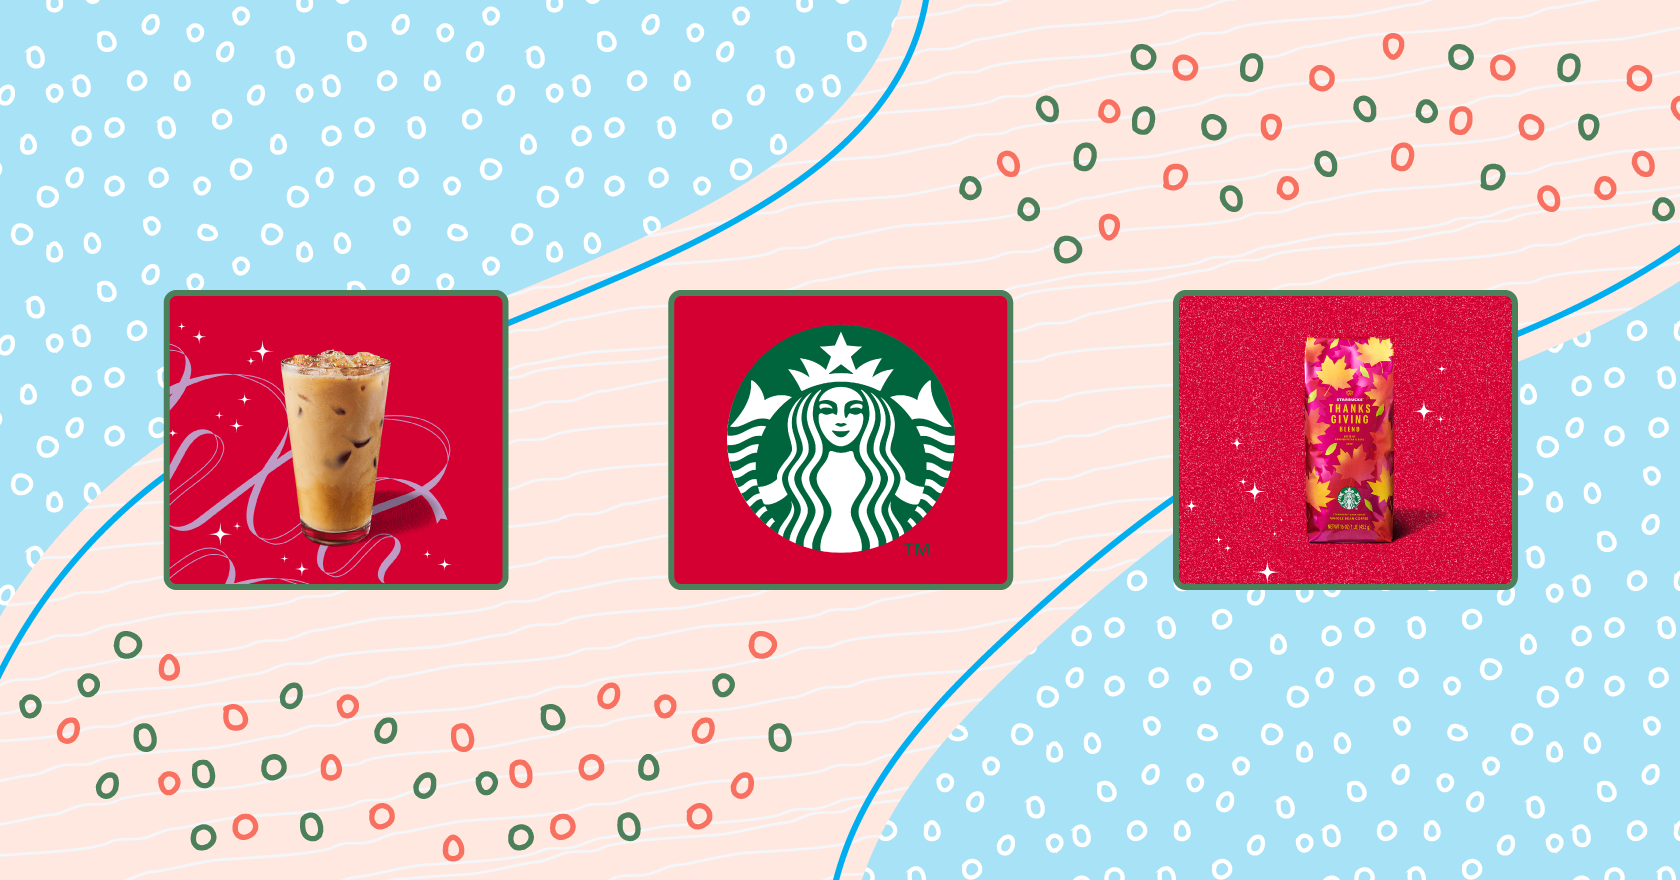 Starbucks Christmas cup brews controversy on social media